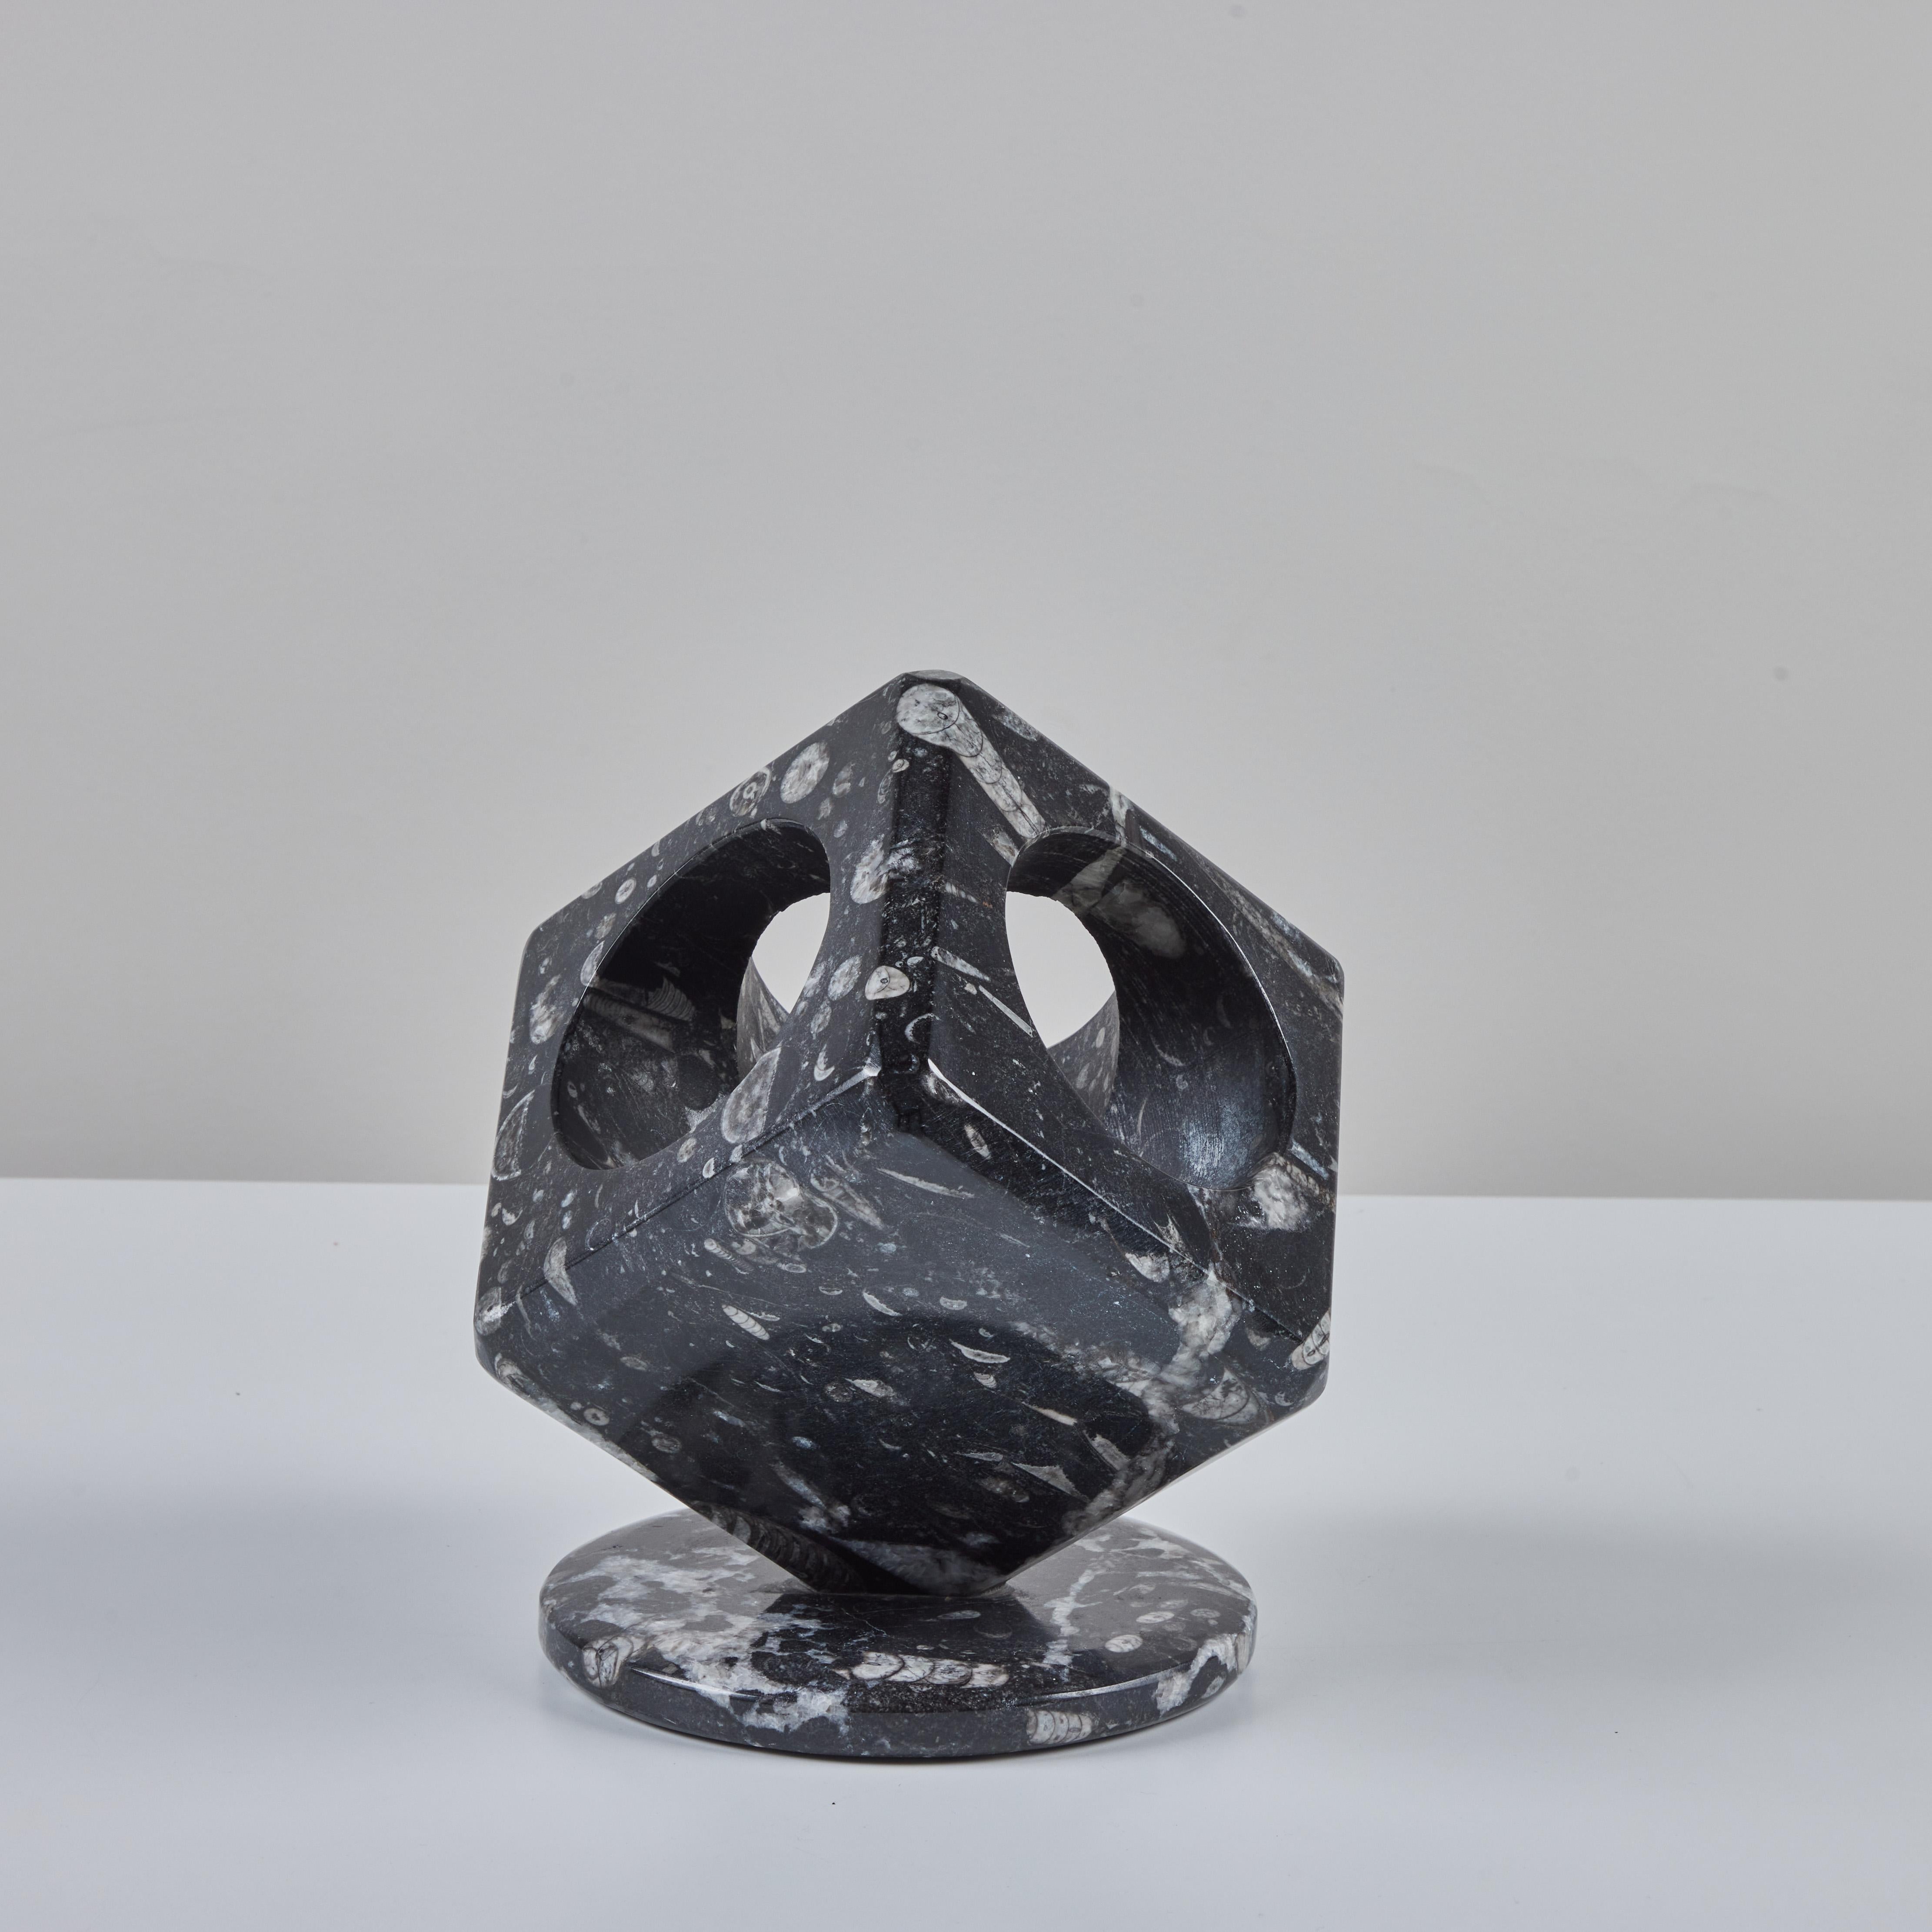 Unknown Fossilized Black Marble Cube Sculpture